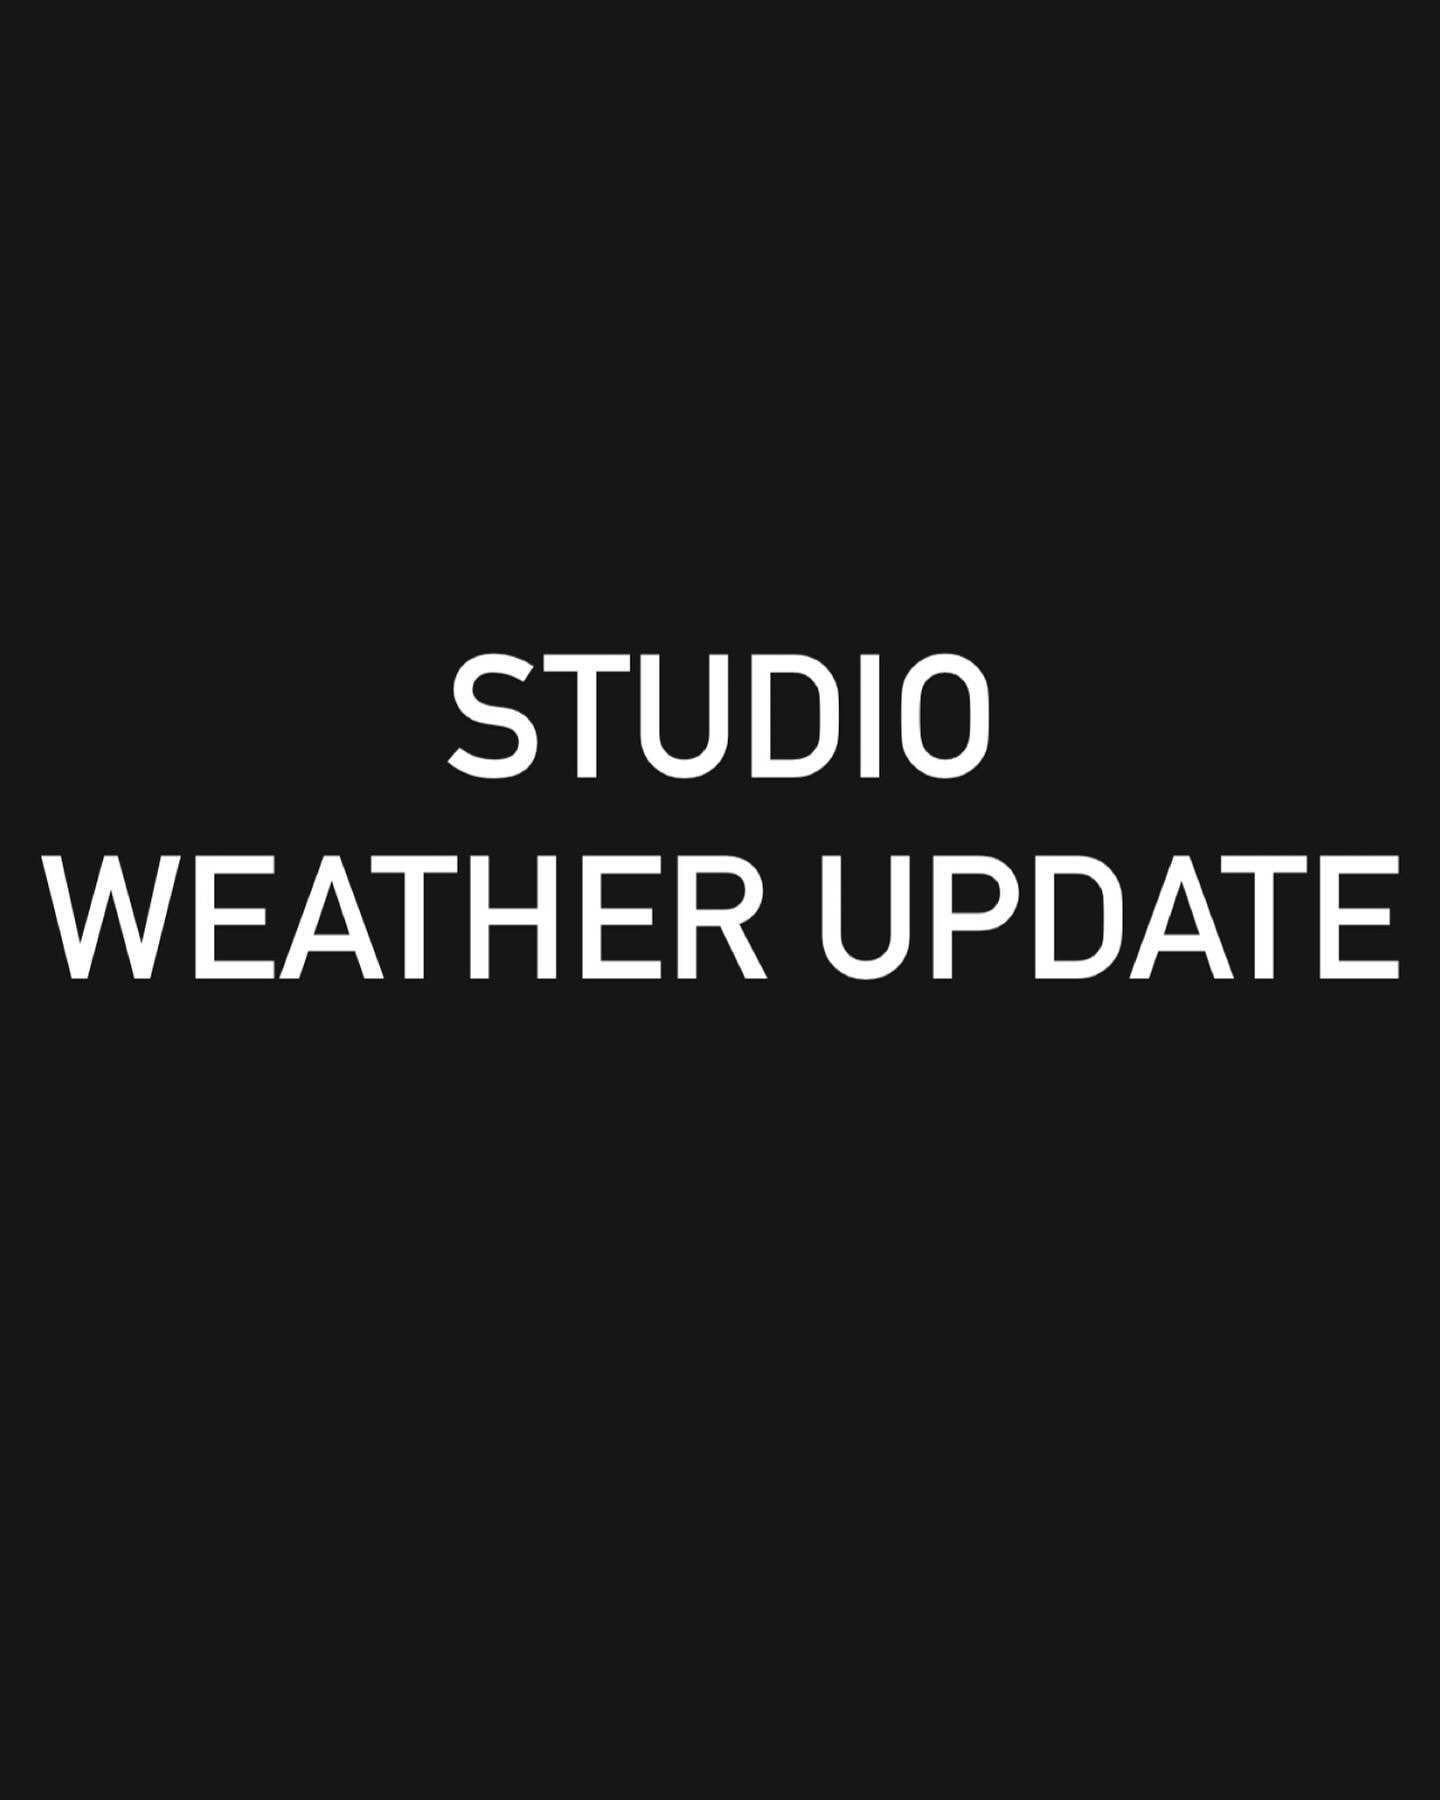 Still no power out here. Sadly all weekend class sessions have been cancelled. We are working to fix this situation ASAP. Us and so many others are without power now, please stay safe out there! Update to come-